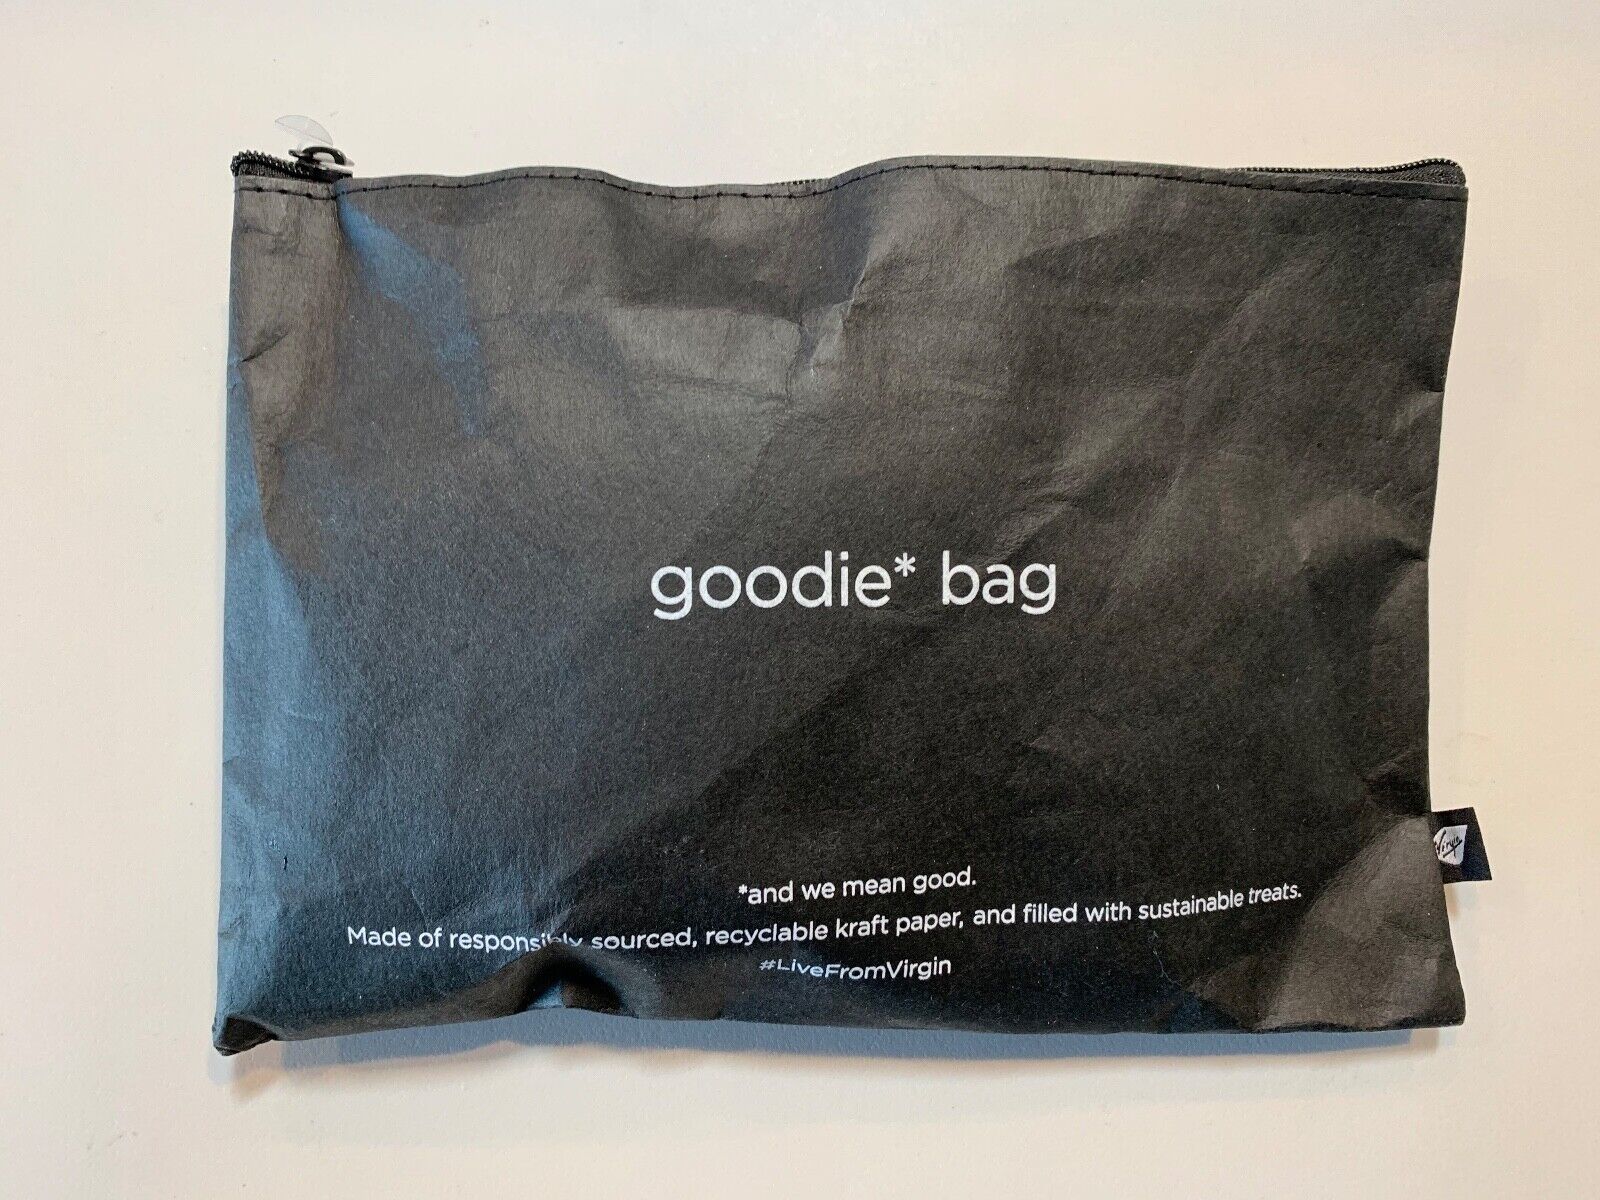 Virgin Atlantic Airlines, Business First Class, goodie* bag - NEW, SEALED